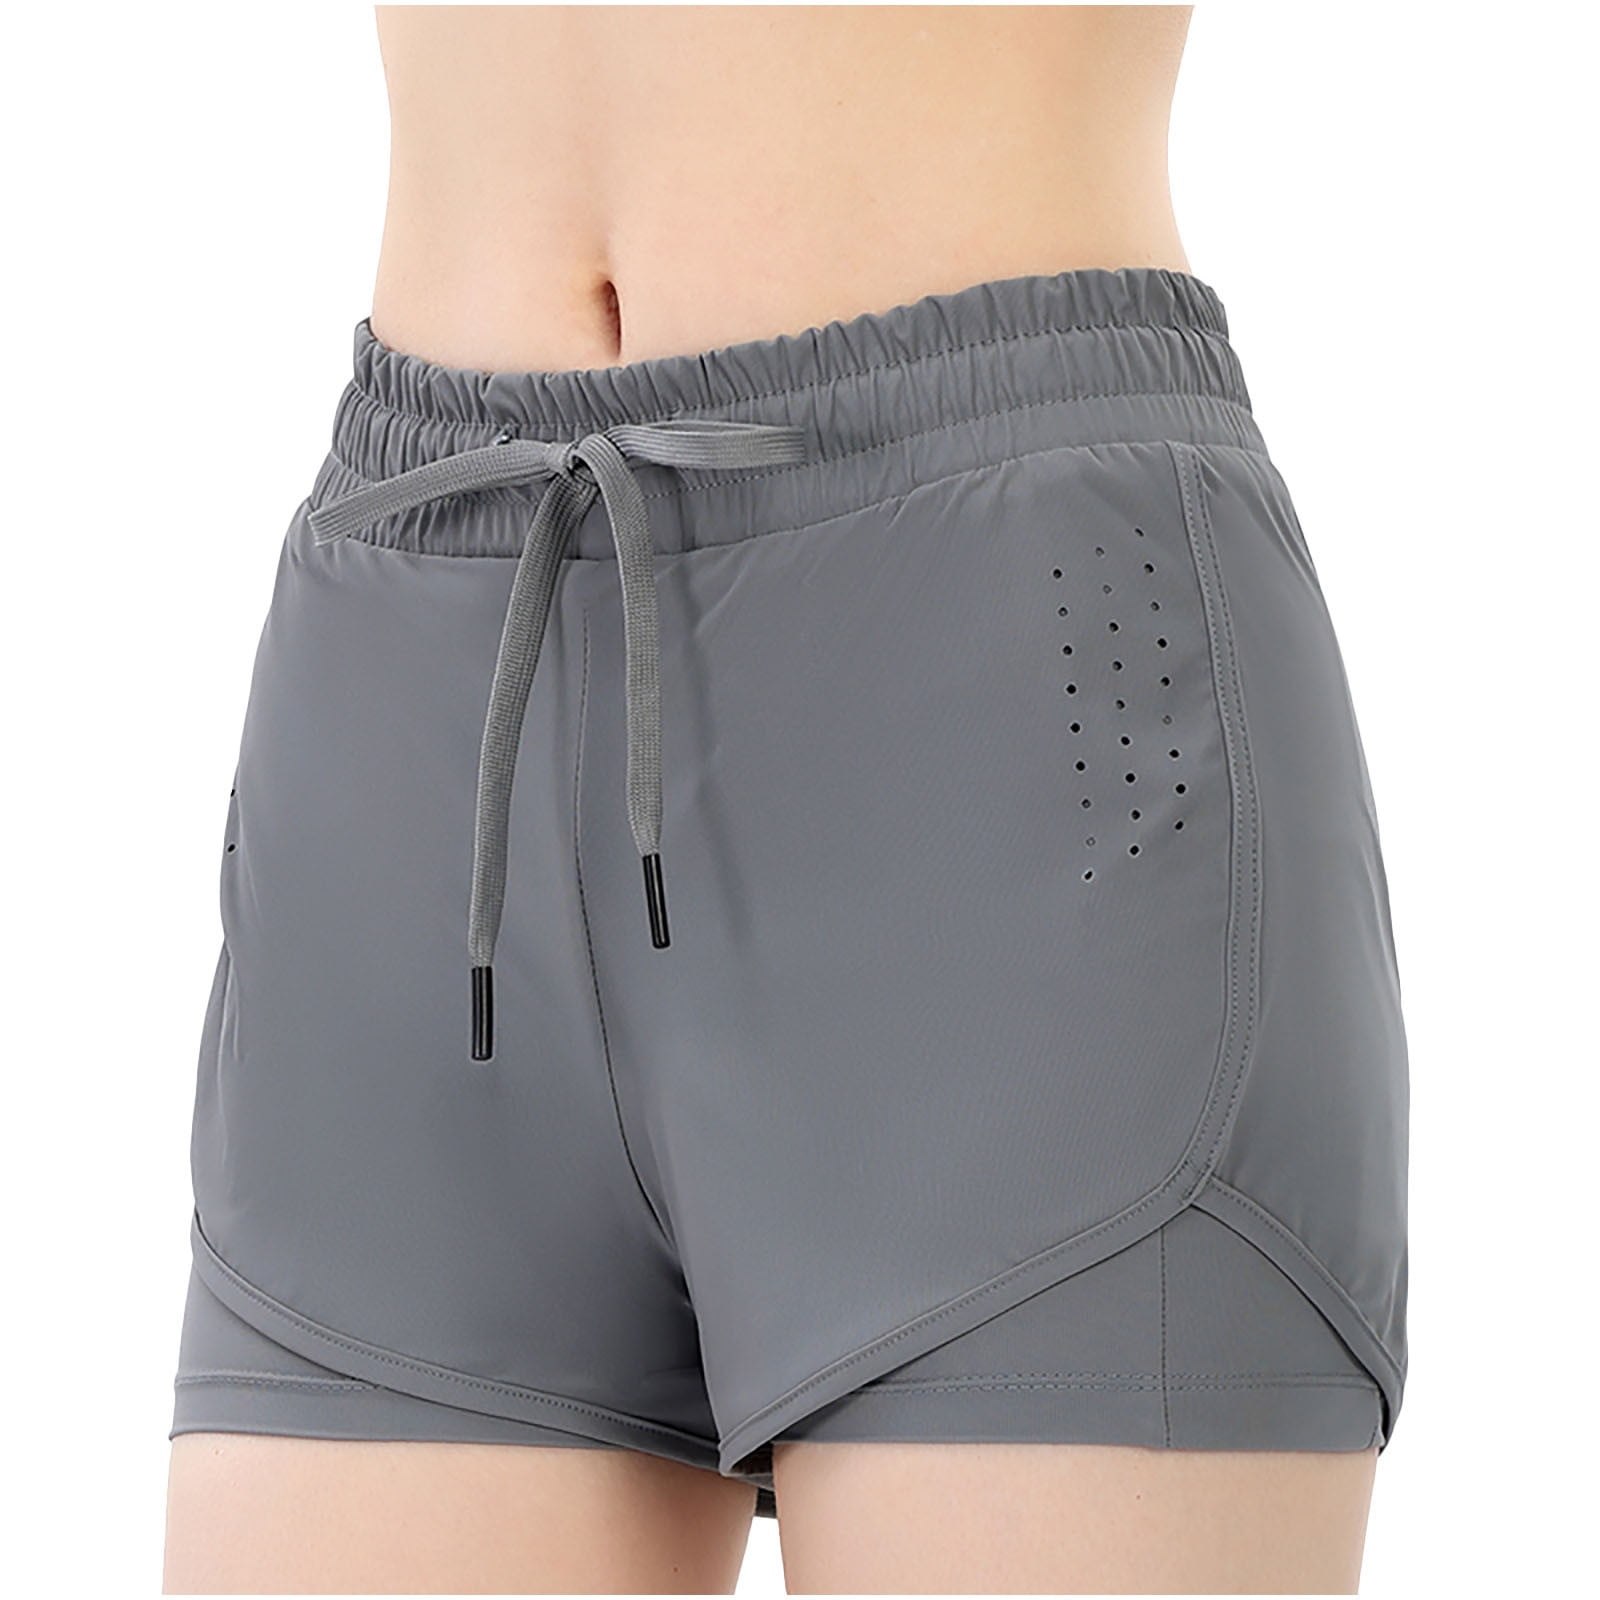 Summer Shorts Saving! Funicet Woman Workout Shorts Lightweight Sports Shorts  Fitness Casual Loose Breathable Quick Dry Athletic Shorts Gray L 